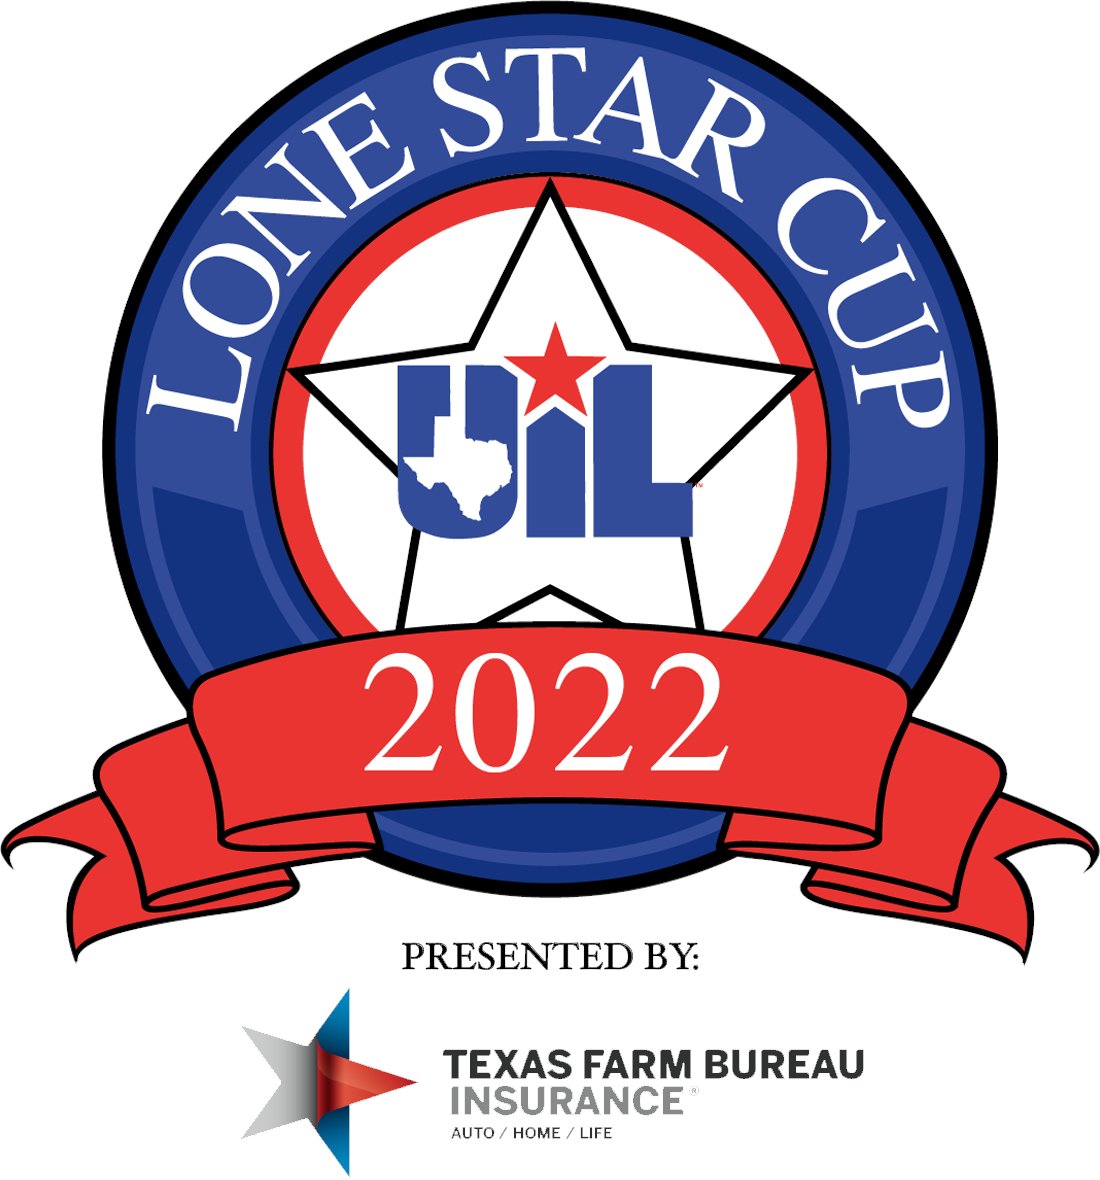 Texas Farm Bureau Insurance will be at Leopard Field for tailgating tonight giving away 500 hamburgers and 500 hotdogs. At halftime of the game Texas Farm Bureau and the UIL will present Lorena High School with the Class 3A Lone Star Cup Trophy. Go Leopards! #TheLeopardWay